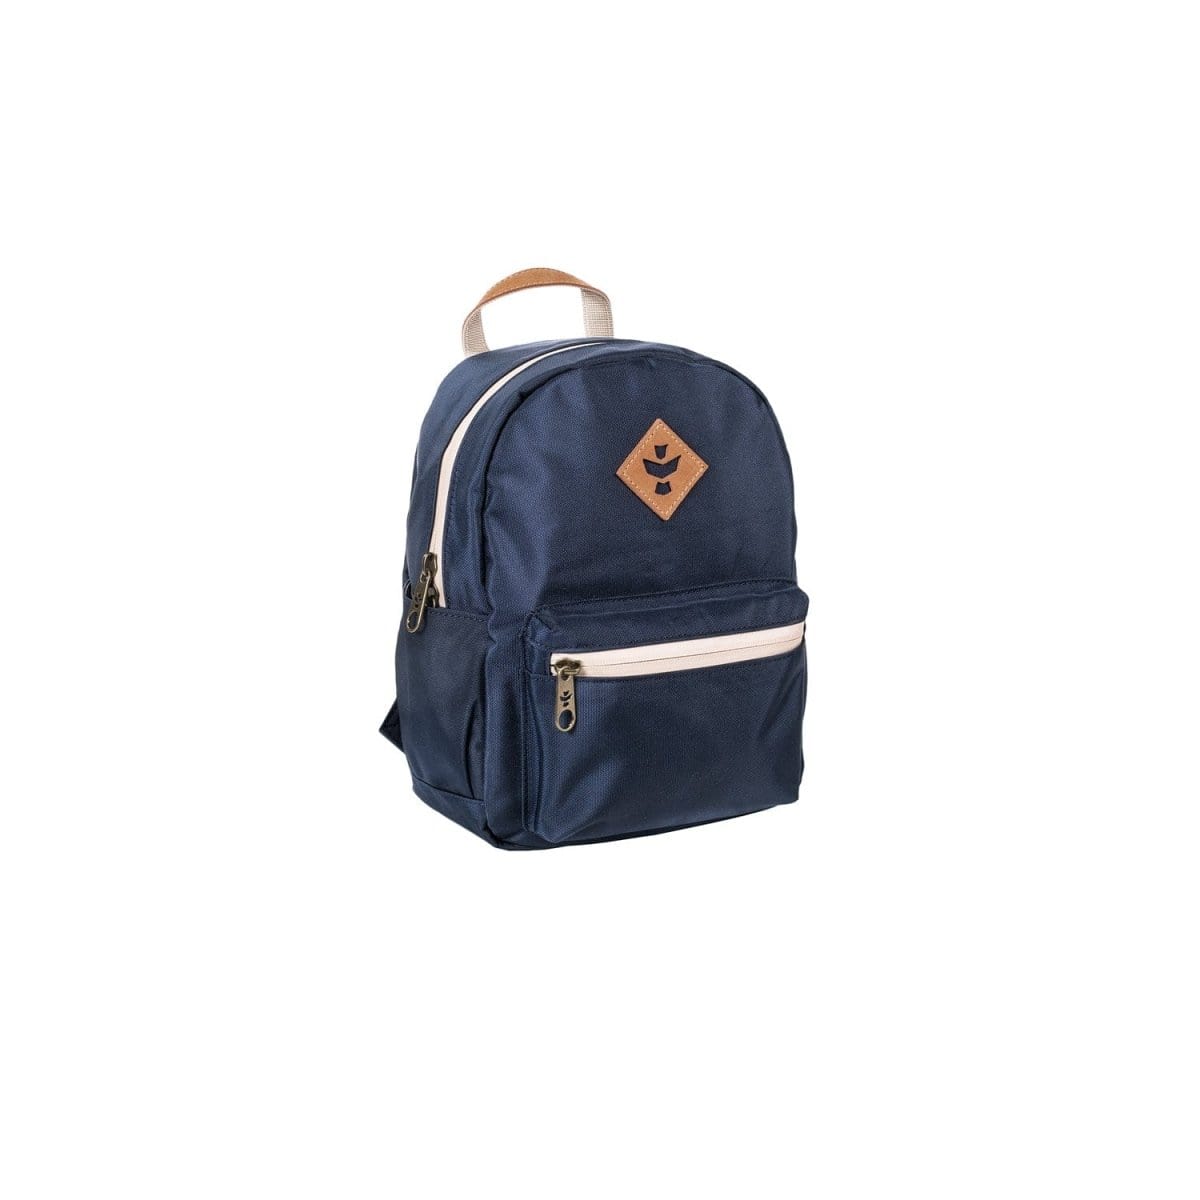 Revelry Supply Travel Bag Navy Blue The Shorty - Smell Proof Mini Backpack